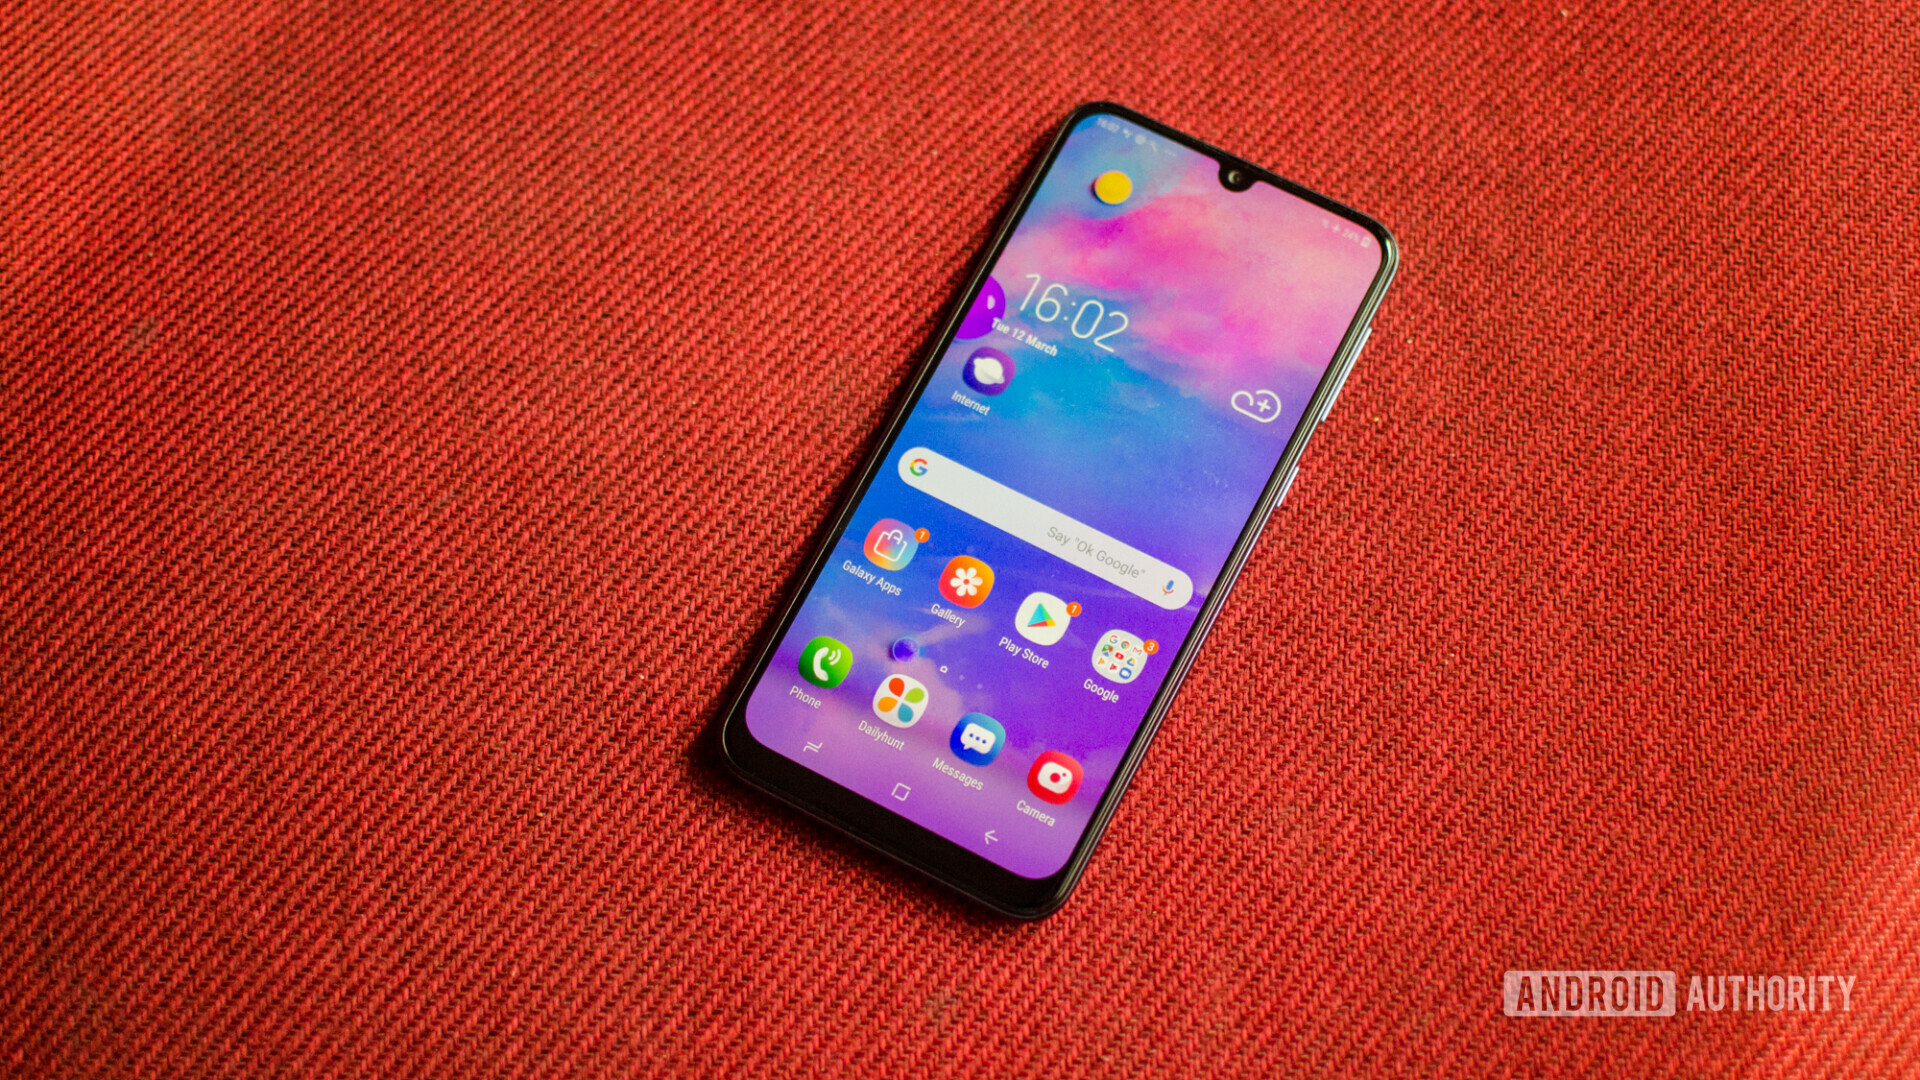 Front side of the Samsung Galaxy M30 with the display turned on showing the default homescreen.